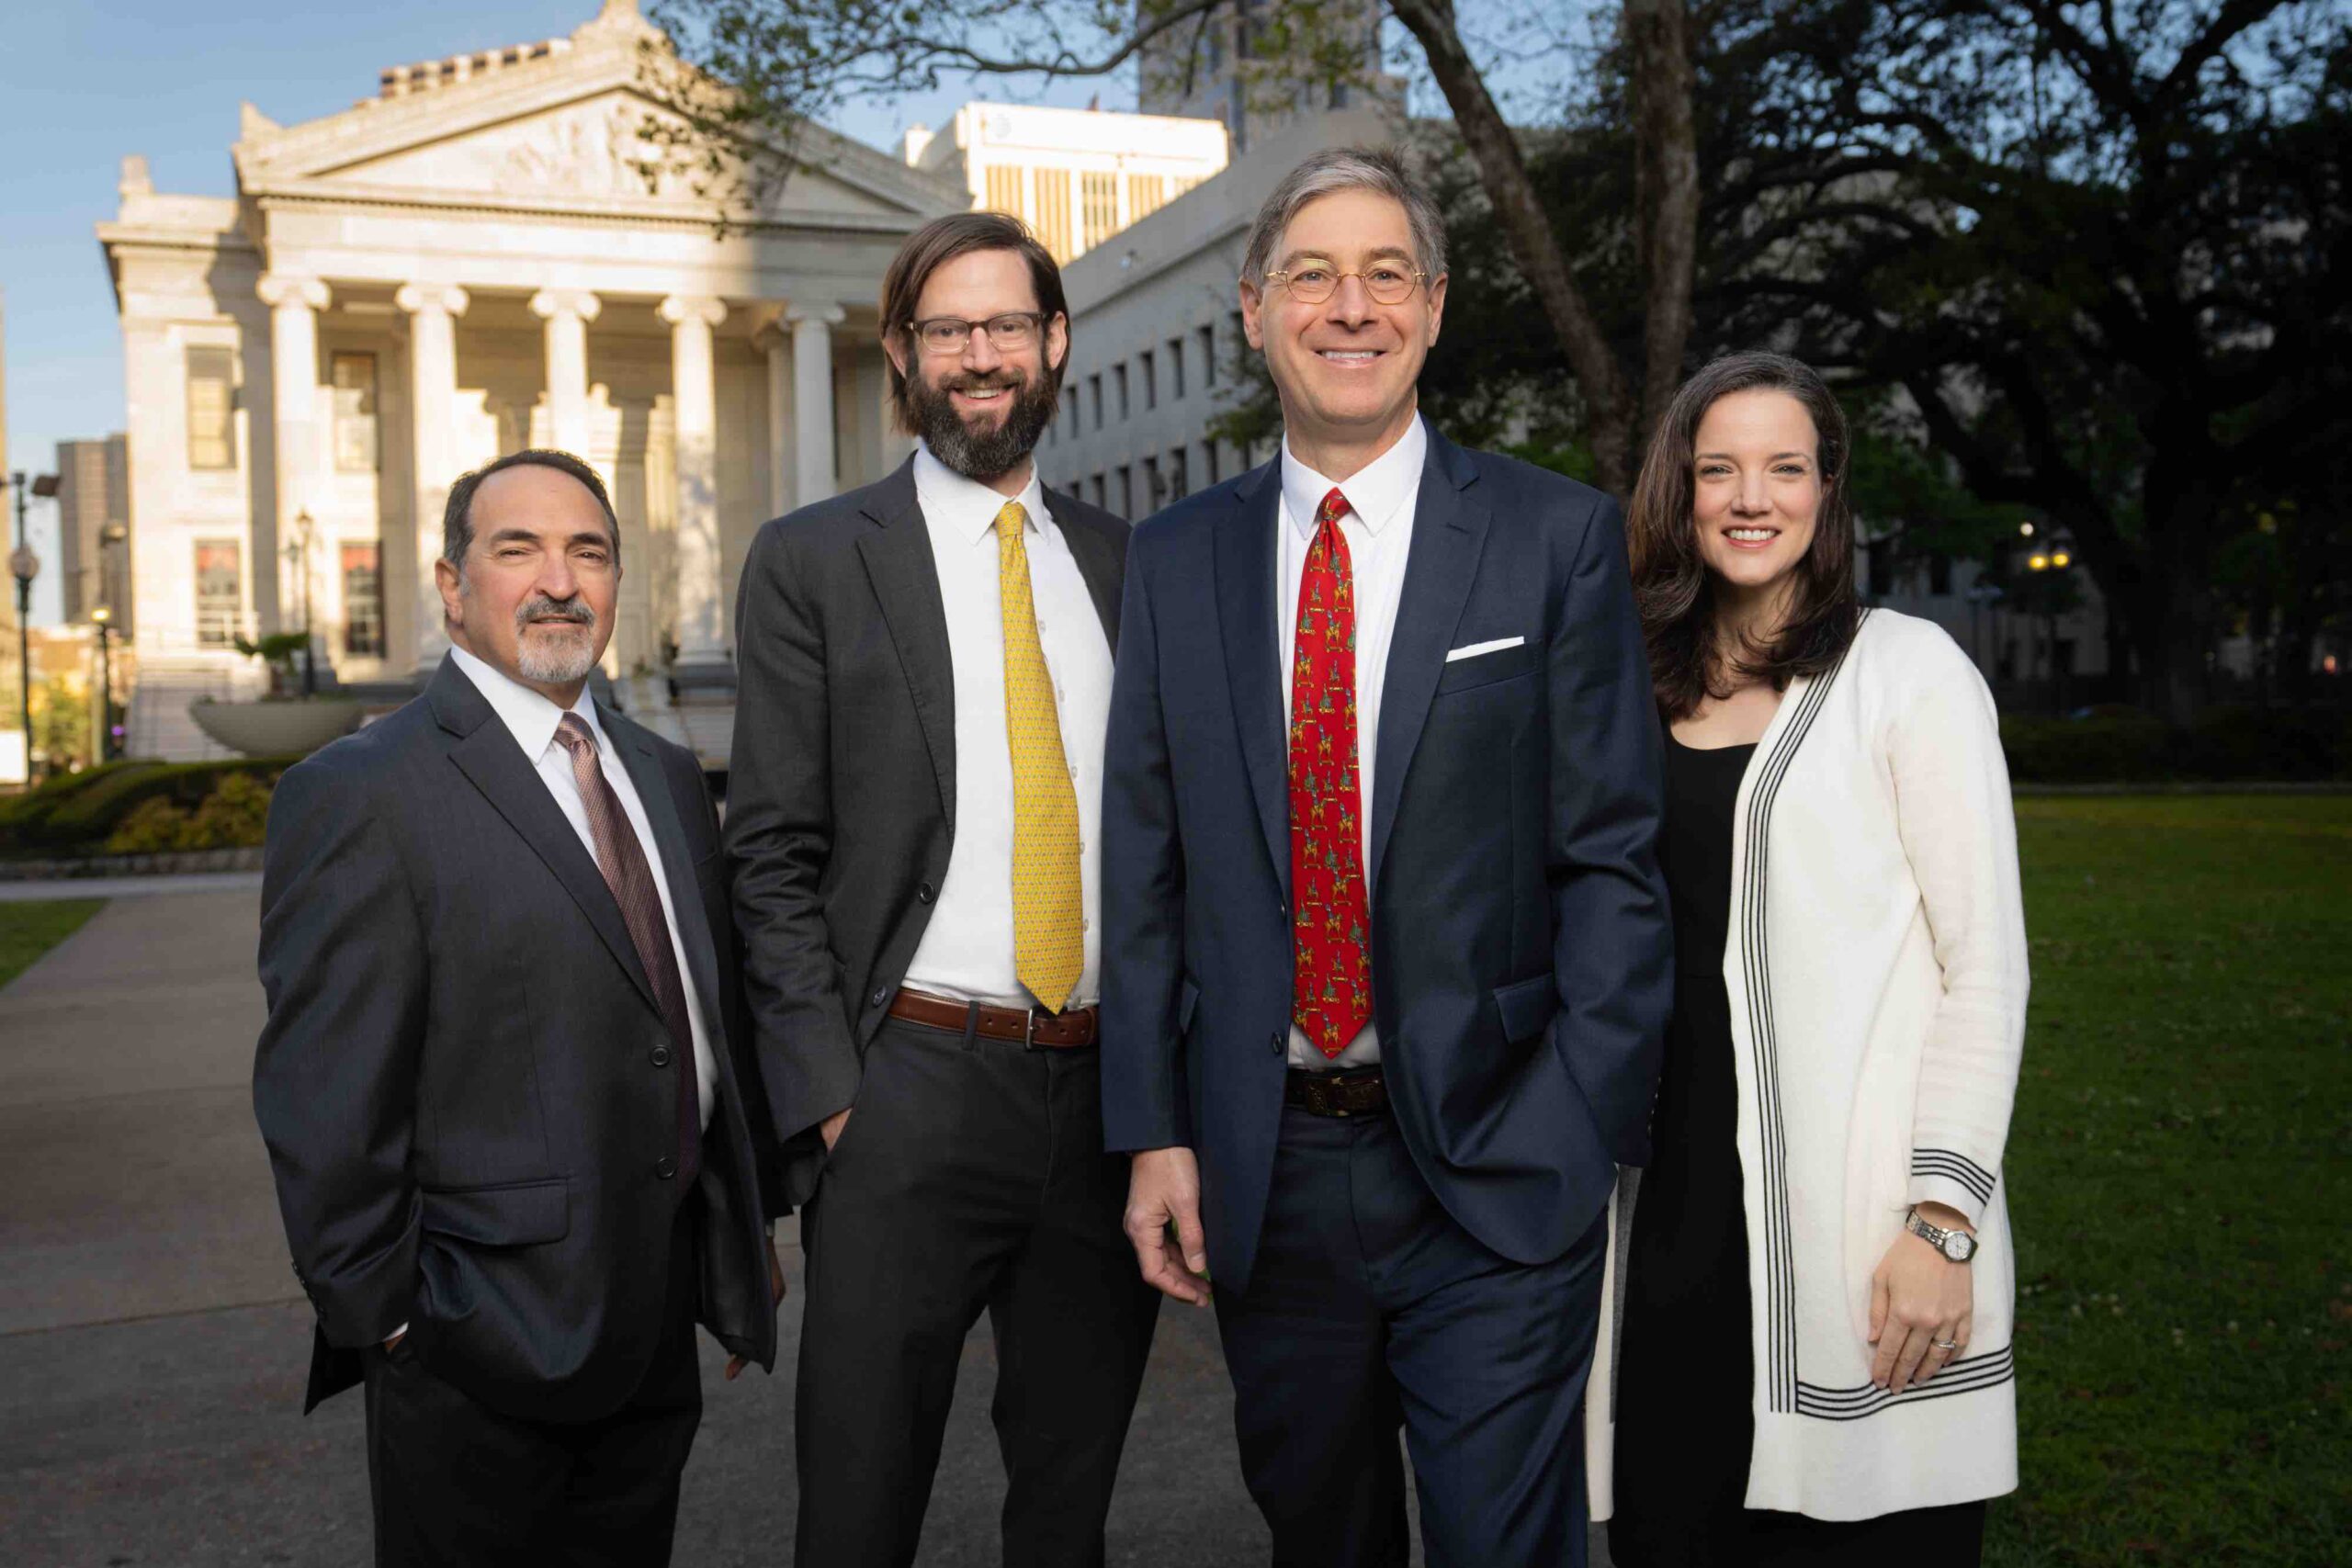 Meet the team of Dumaine Investments New Orleans Financial Planning, Wealth Management, and Investments Advice - David Evola, Adam Babson, Clifford Favrot, and Mindy McCollister